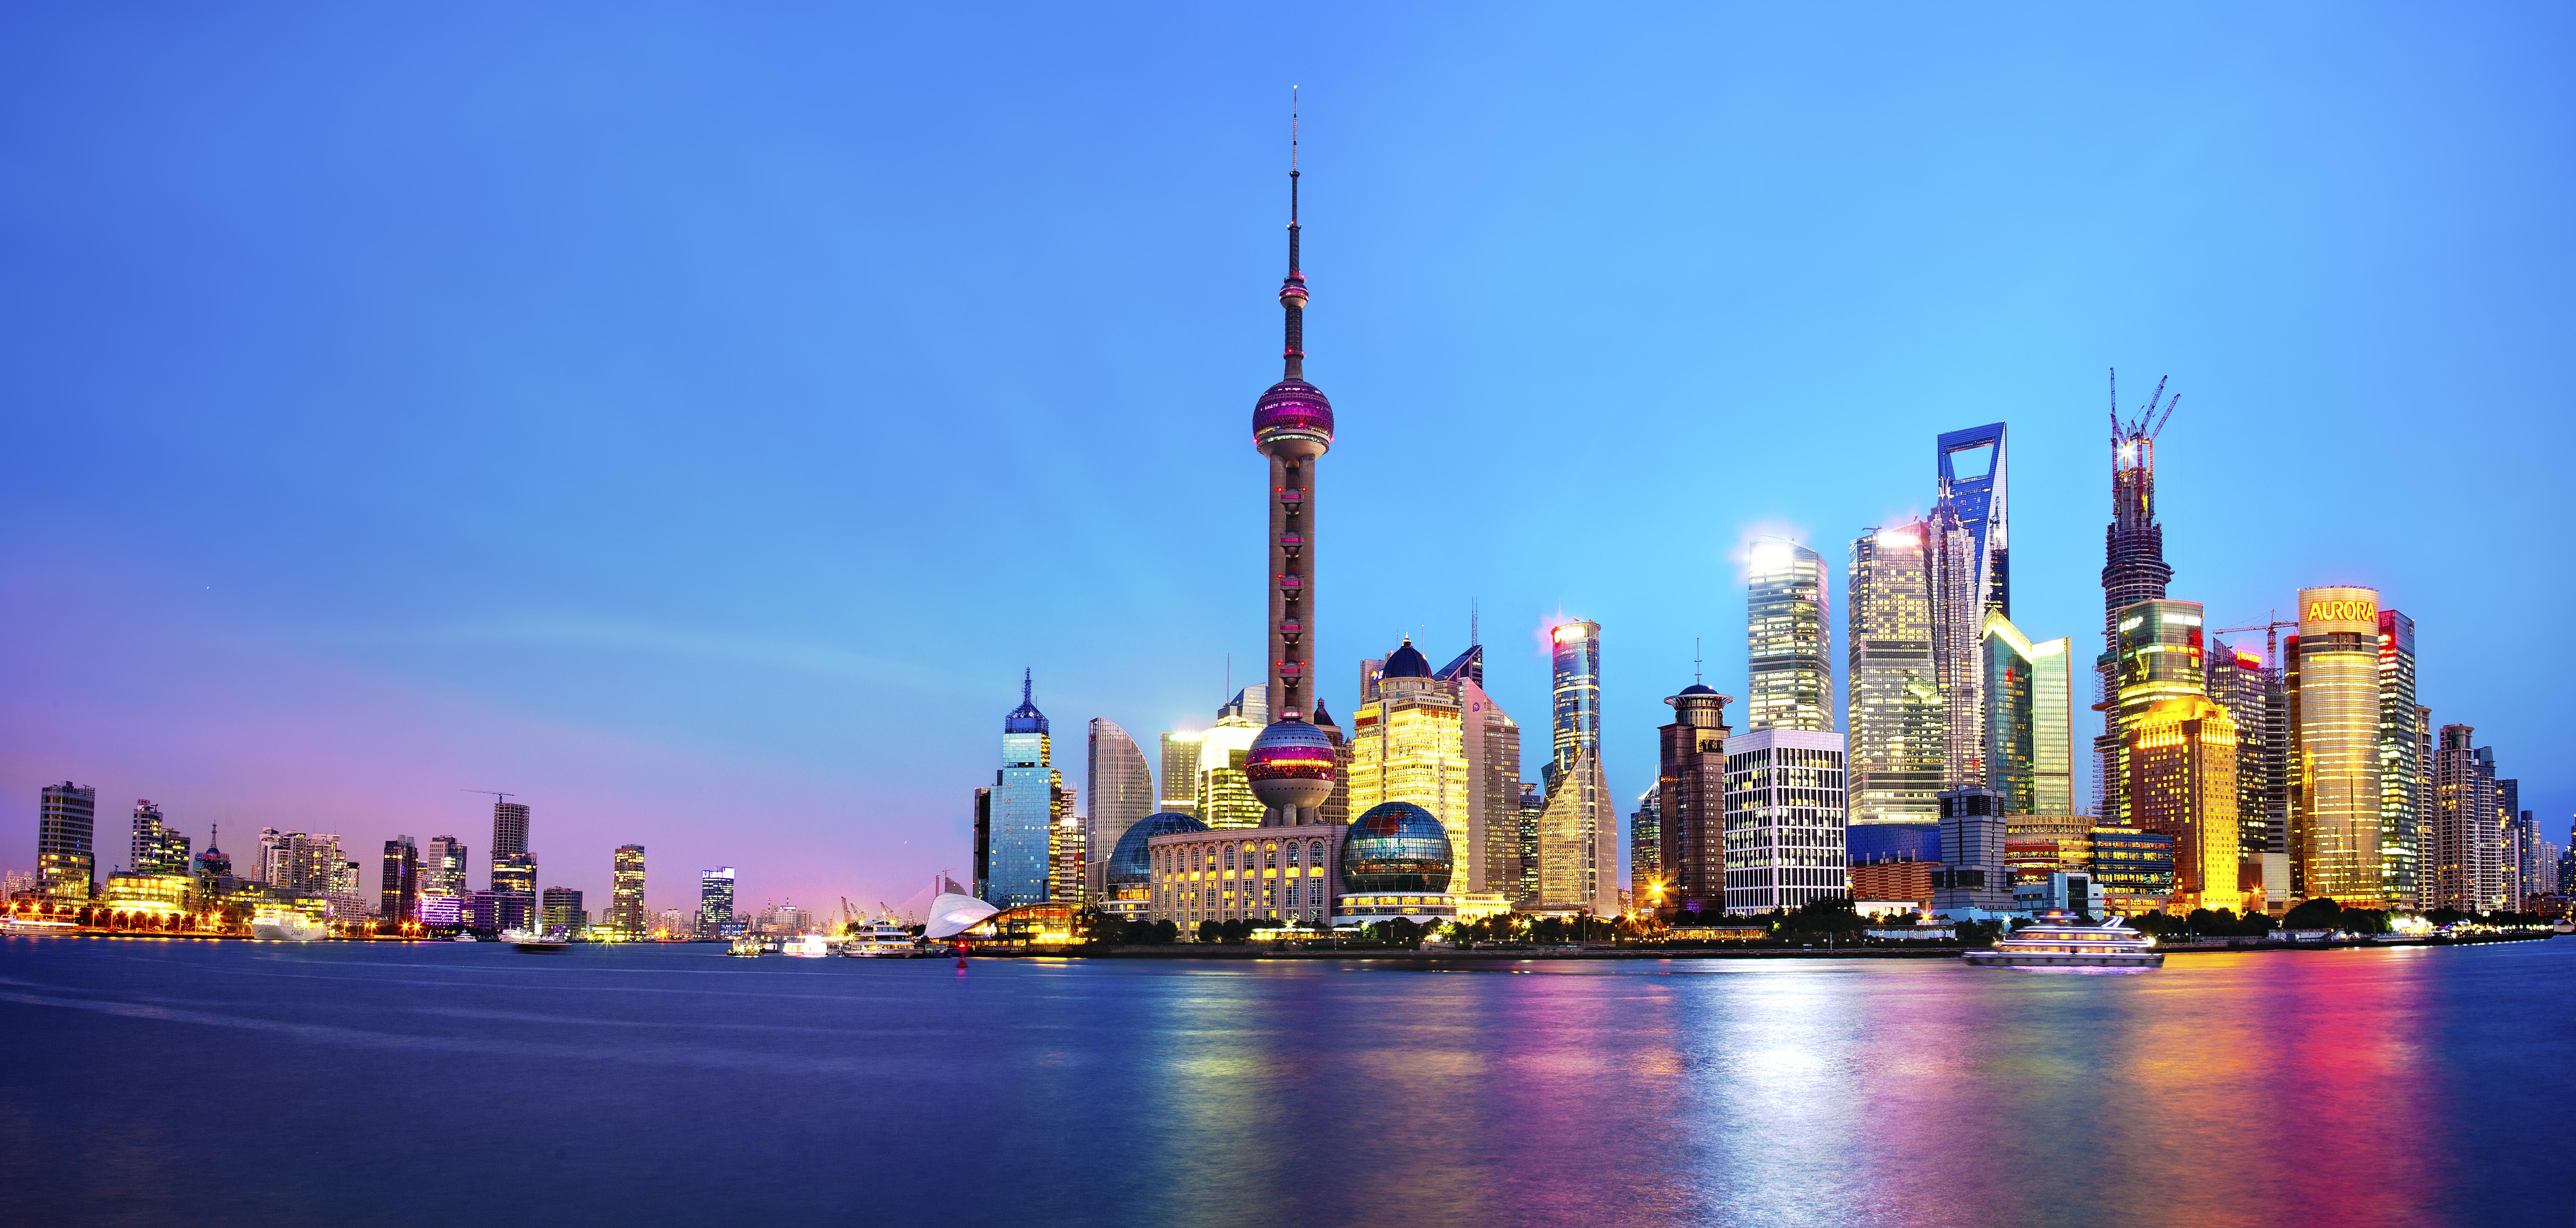 Shanghai Wallpapers Pictures Images